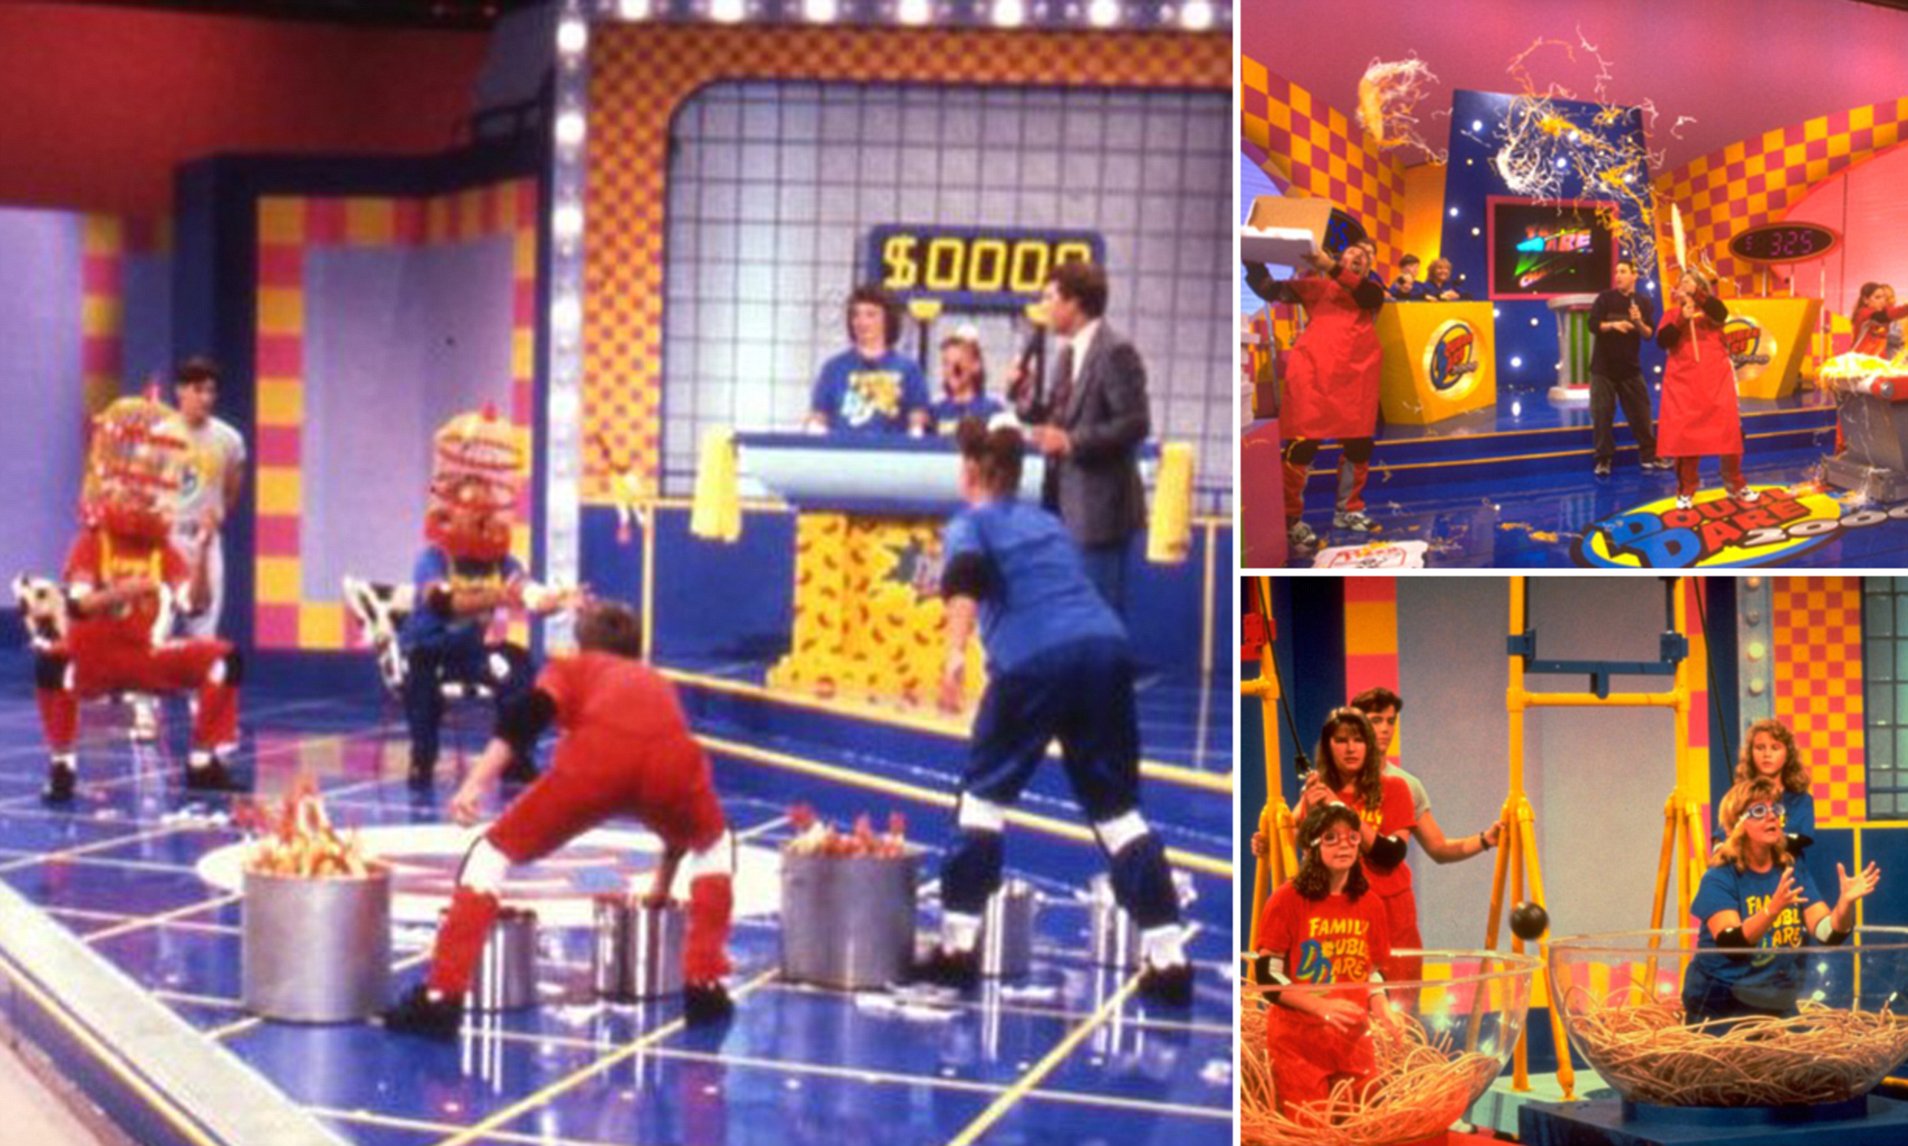 "Double Dare" was famous for its messy physical challenges, which often involved slime, pies, and other gooey substances. It was a precursor to the messy game show trend that followed.